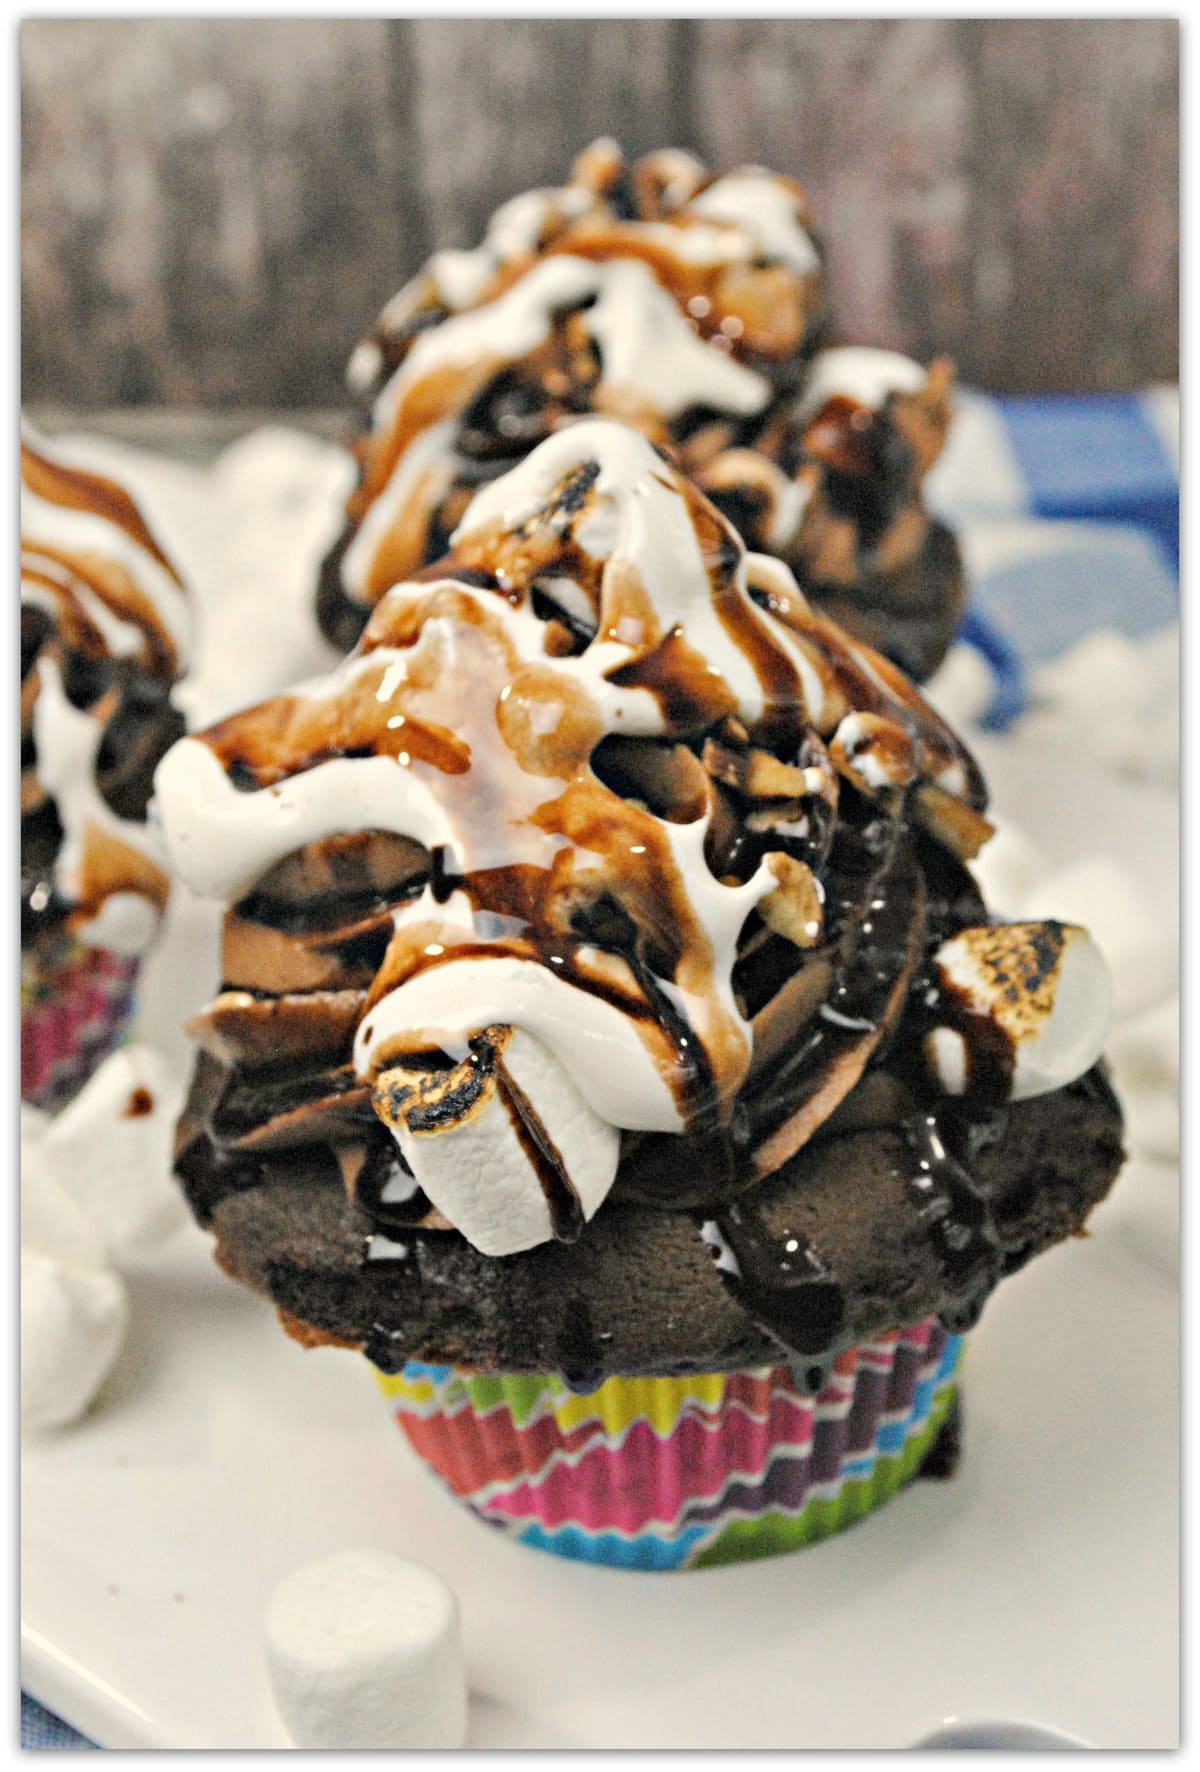 What could be better than Mudslide Cupcakes? There is one dessert I always want to order when it's on the menu, and that's a mudslide. However it's made, you know it's going to be good, right? I mean, when you combine chocolate, marshmallow fluff, toasted marshmallows, and crunchy walnuts, you just can't go wrong.